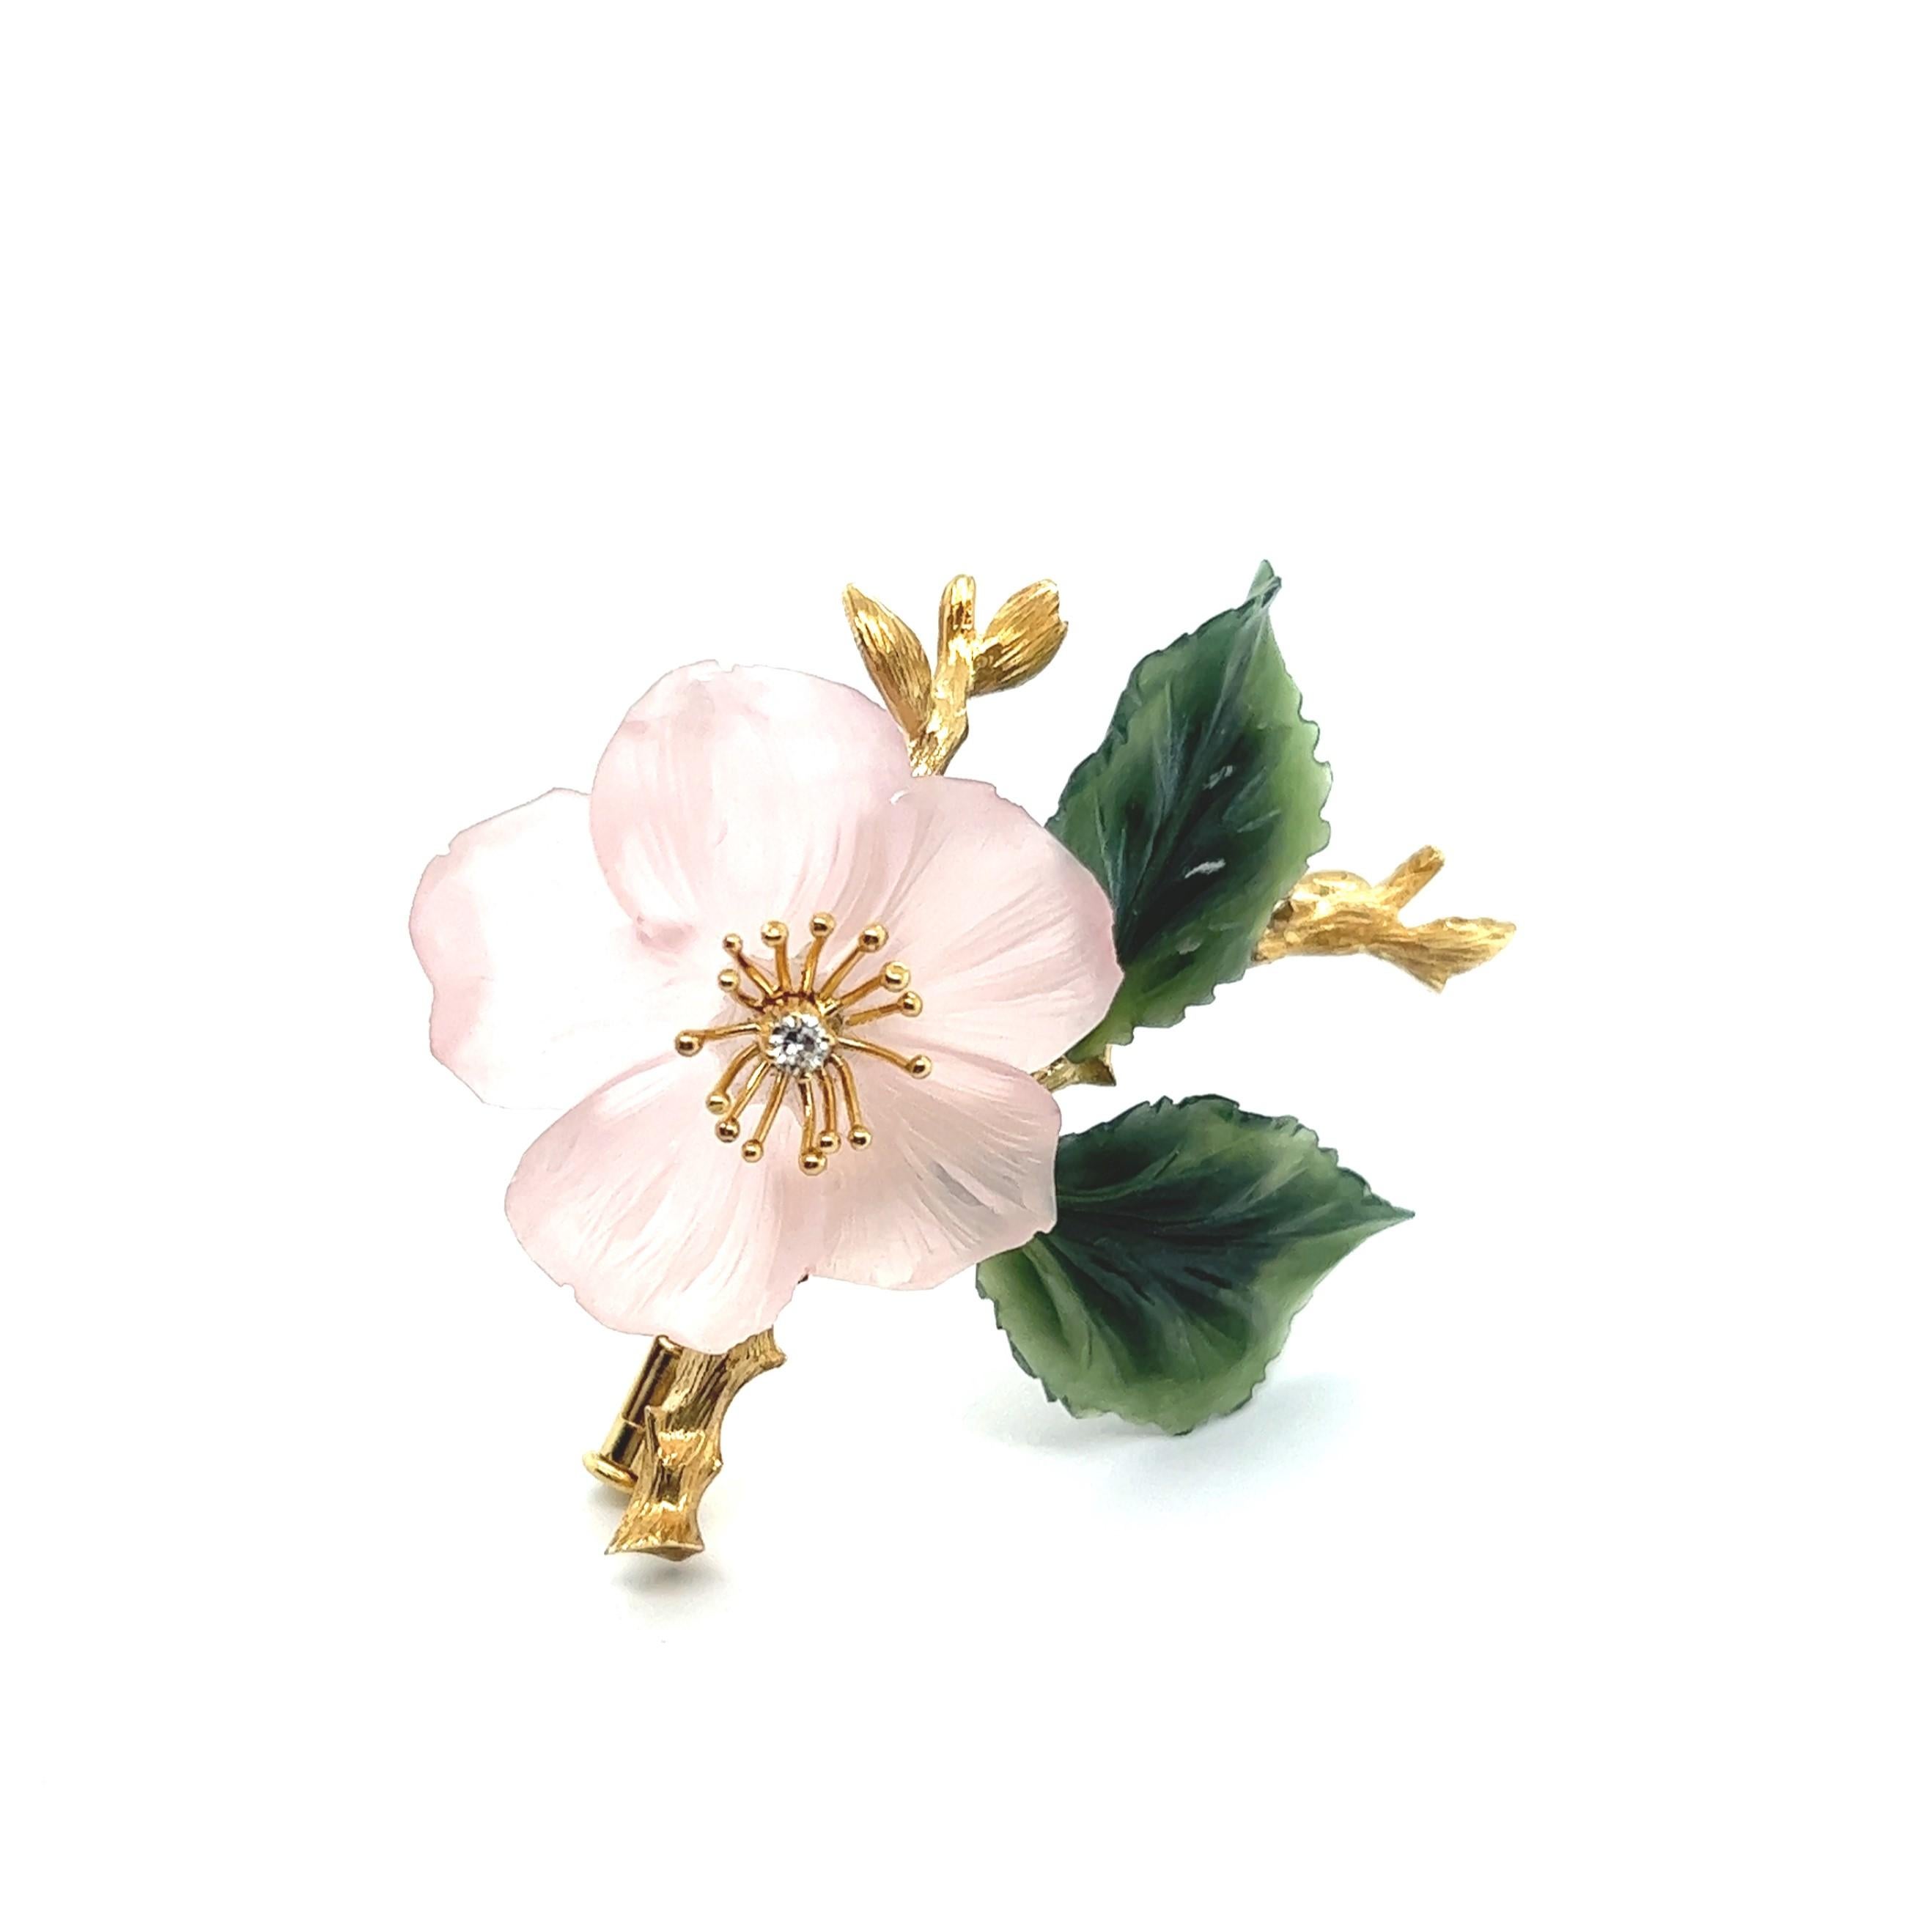 Introducing our exquisite flower-inspired brooch, a harmonious example of natural beauty created by Austrian jeweler Ernst Paltscho. Known far beyond Austria's borders, Paltscho was recognized in Vienna as the 